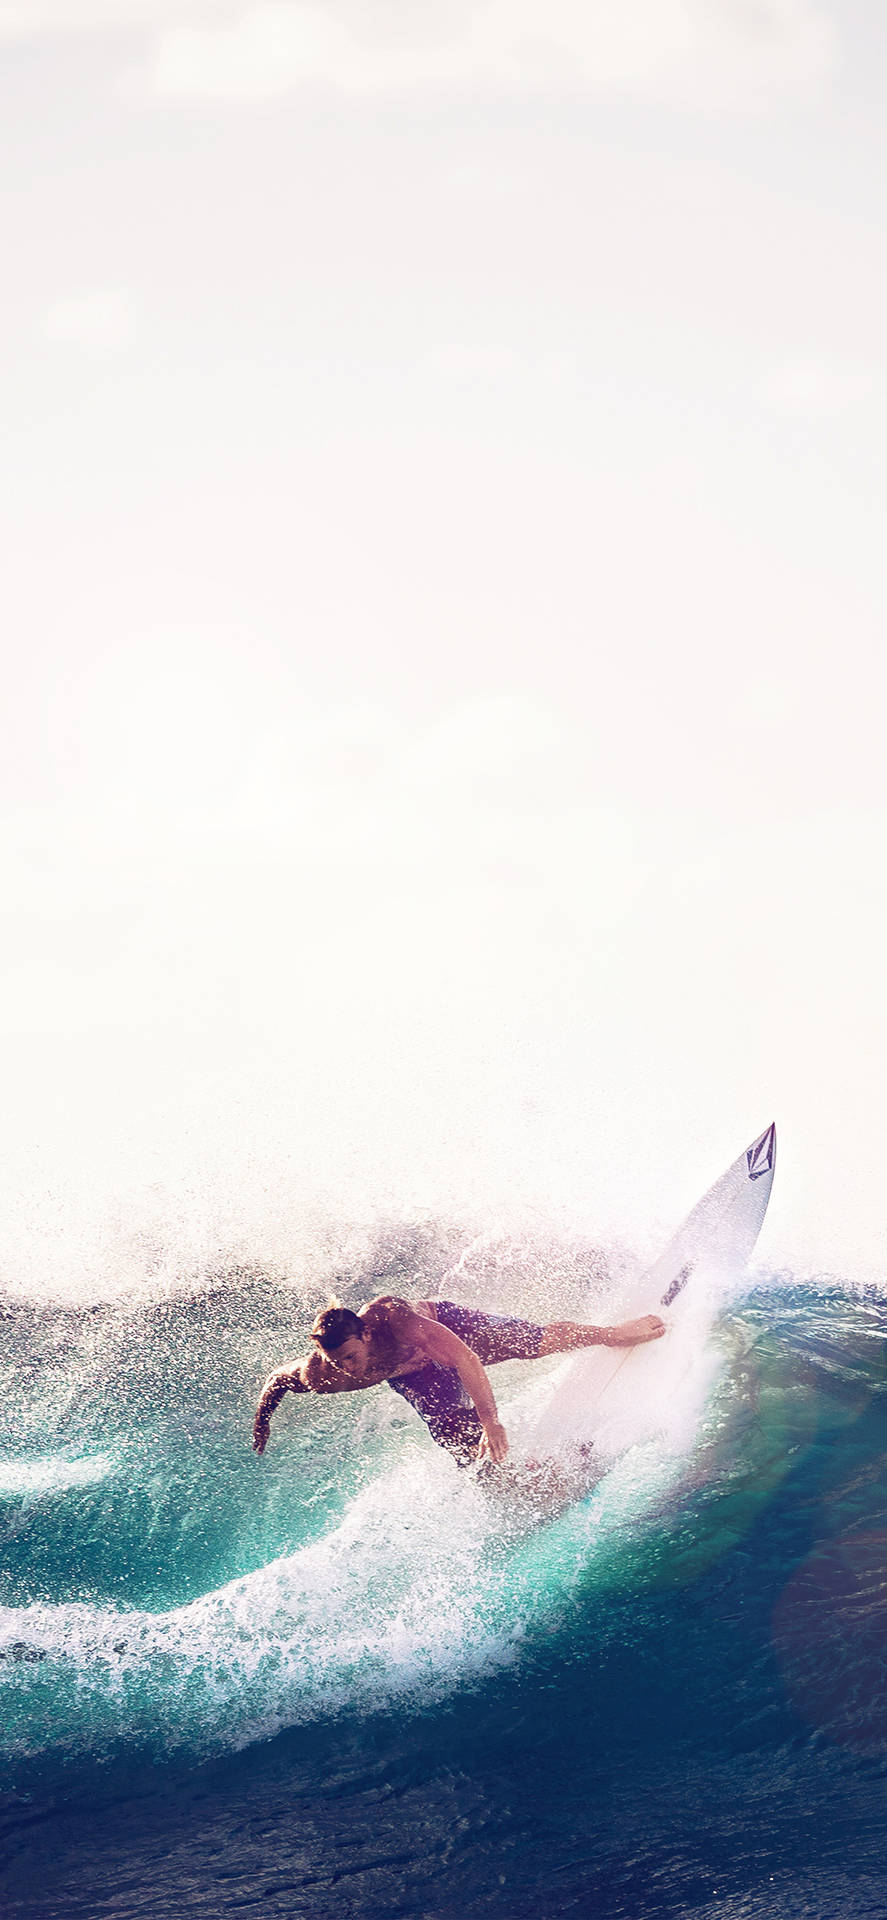 White Surfboard Riding The Waves Sports iPhone Wallpaper